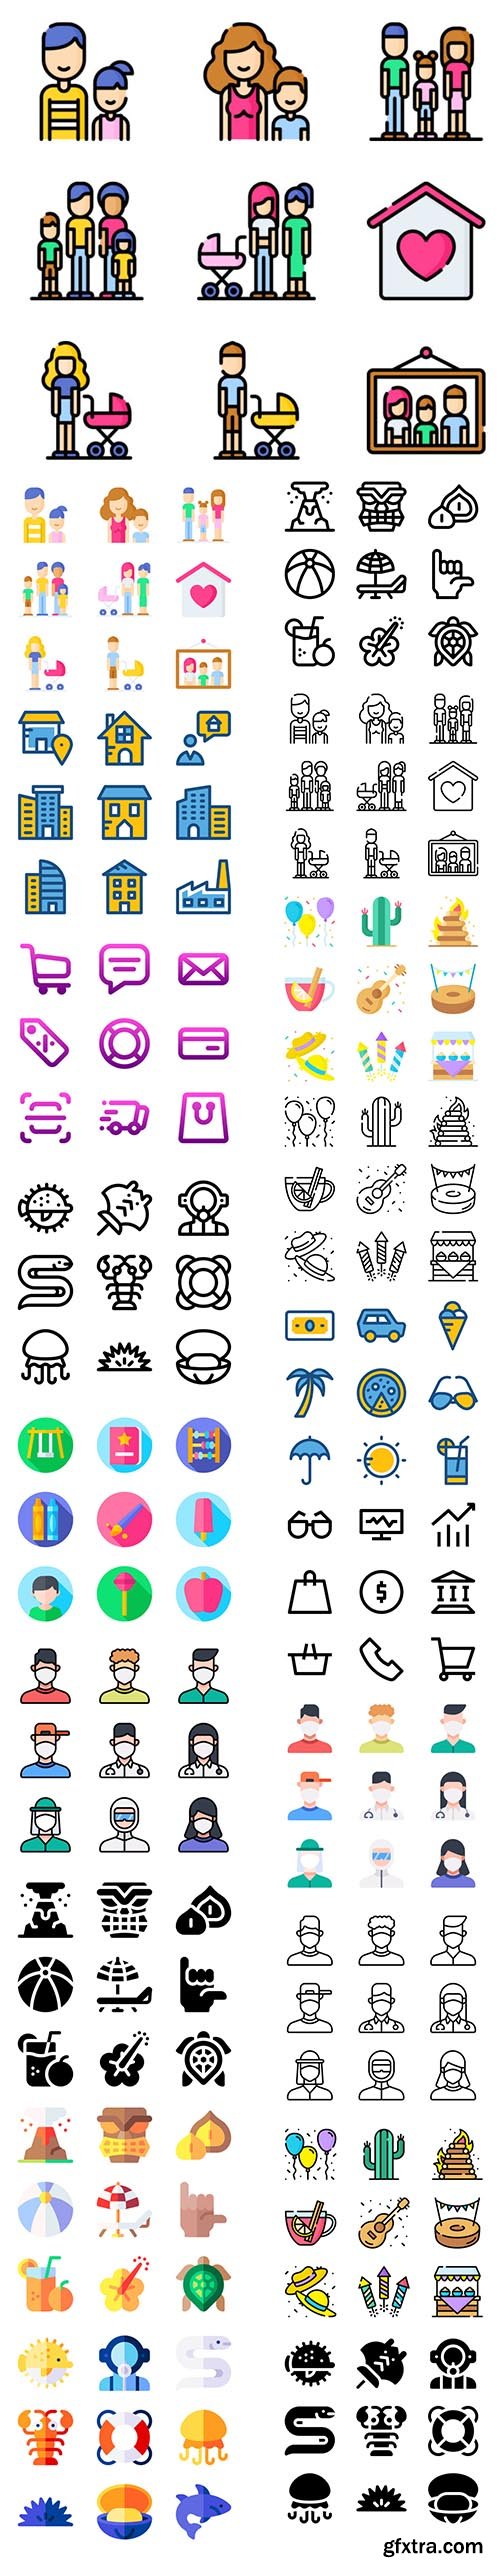 Big Icons Various Pack - More 800 Icons!